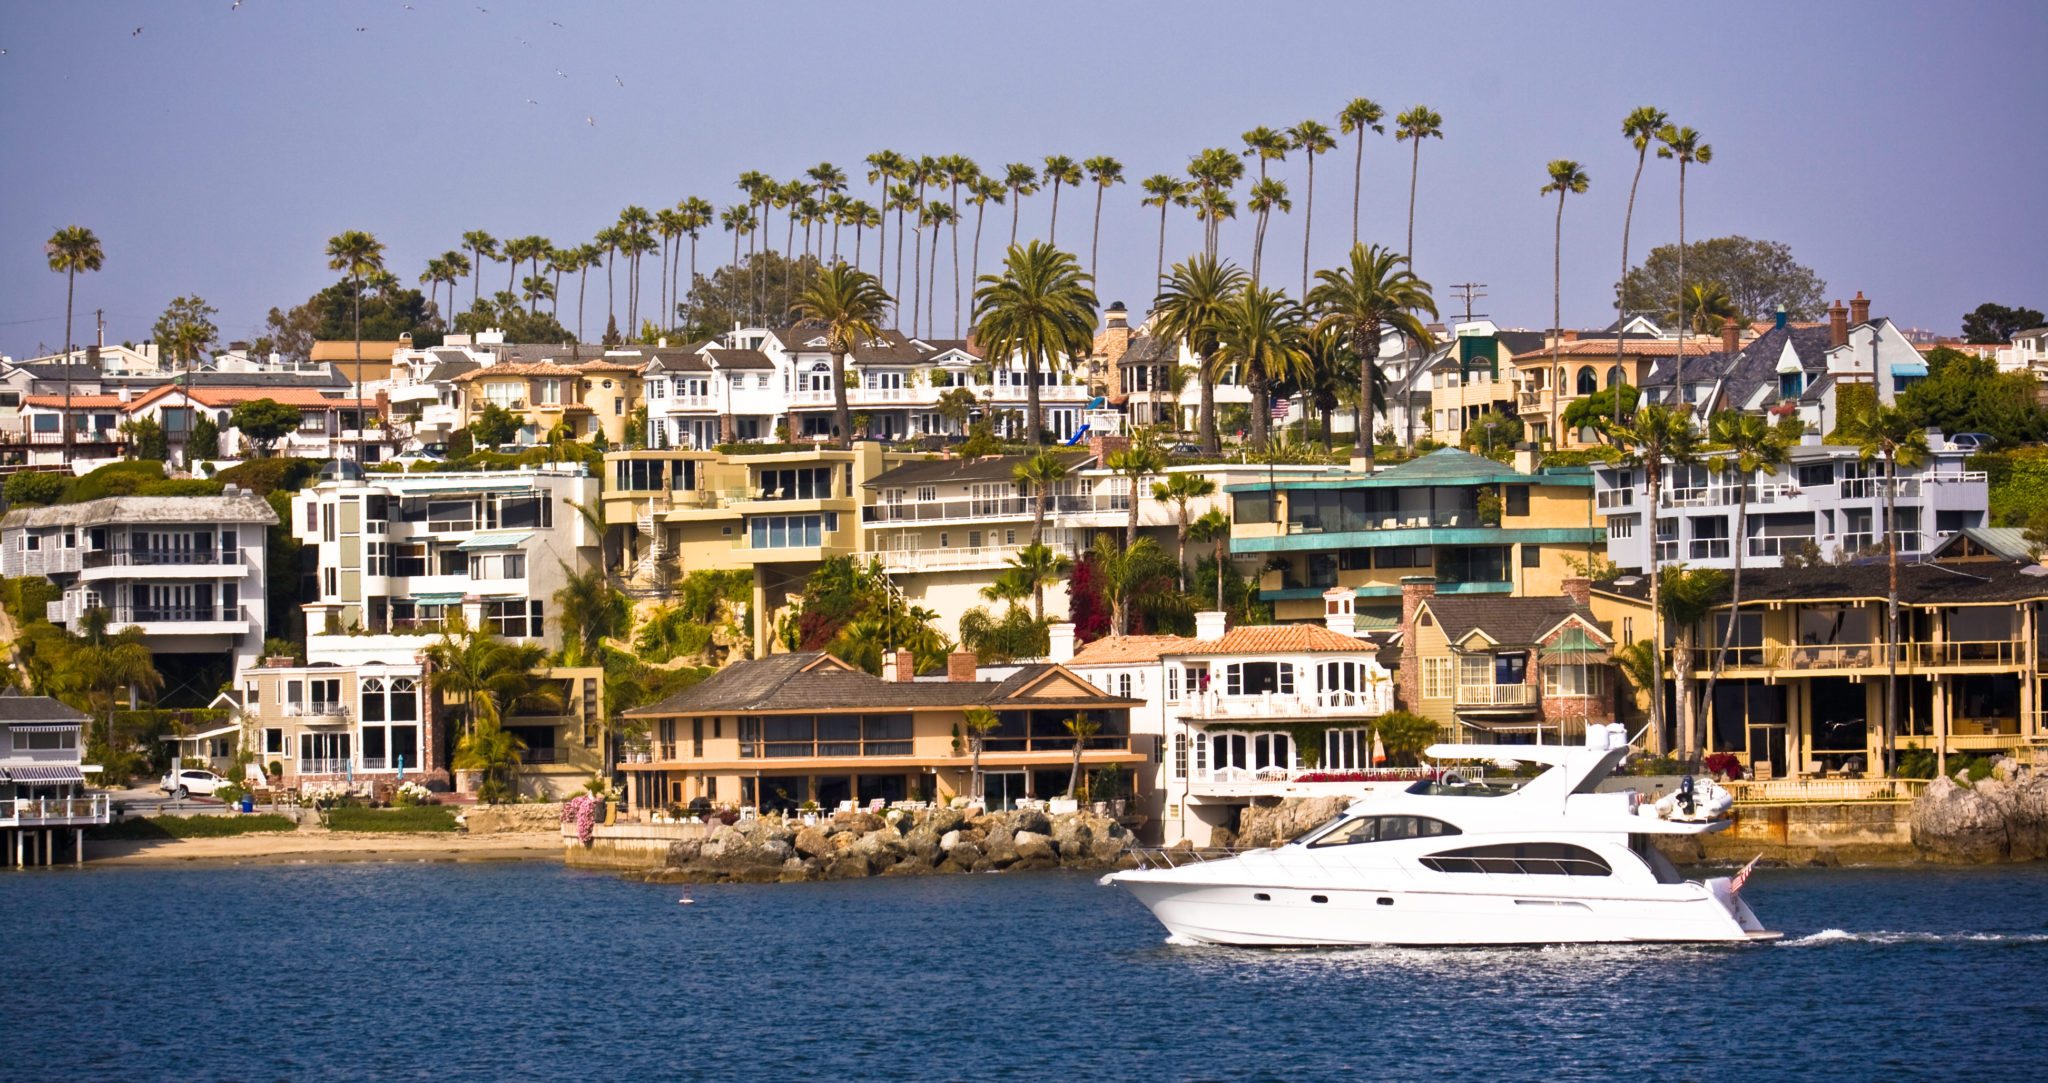 about image - Newport Beach